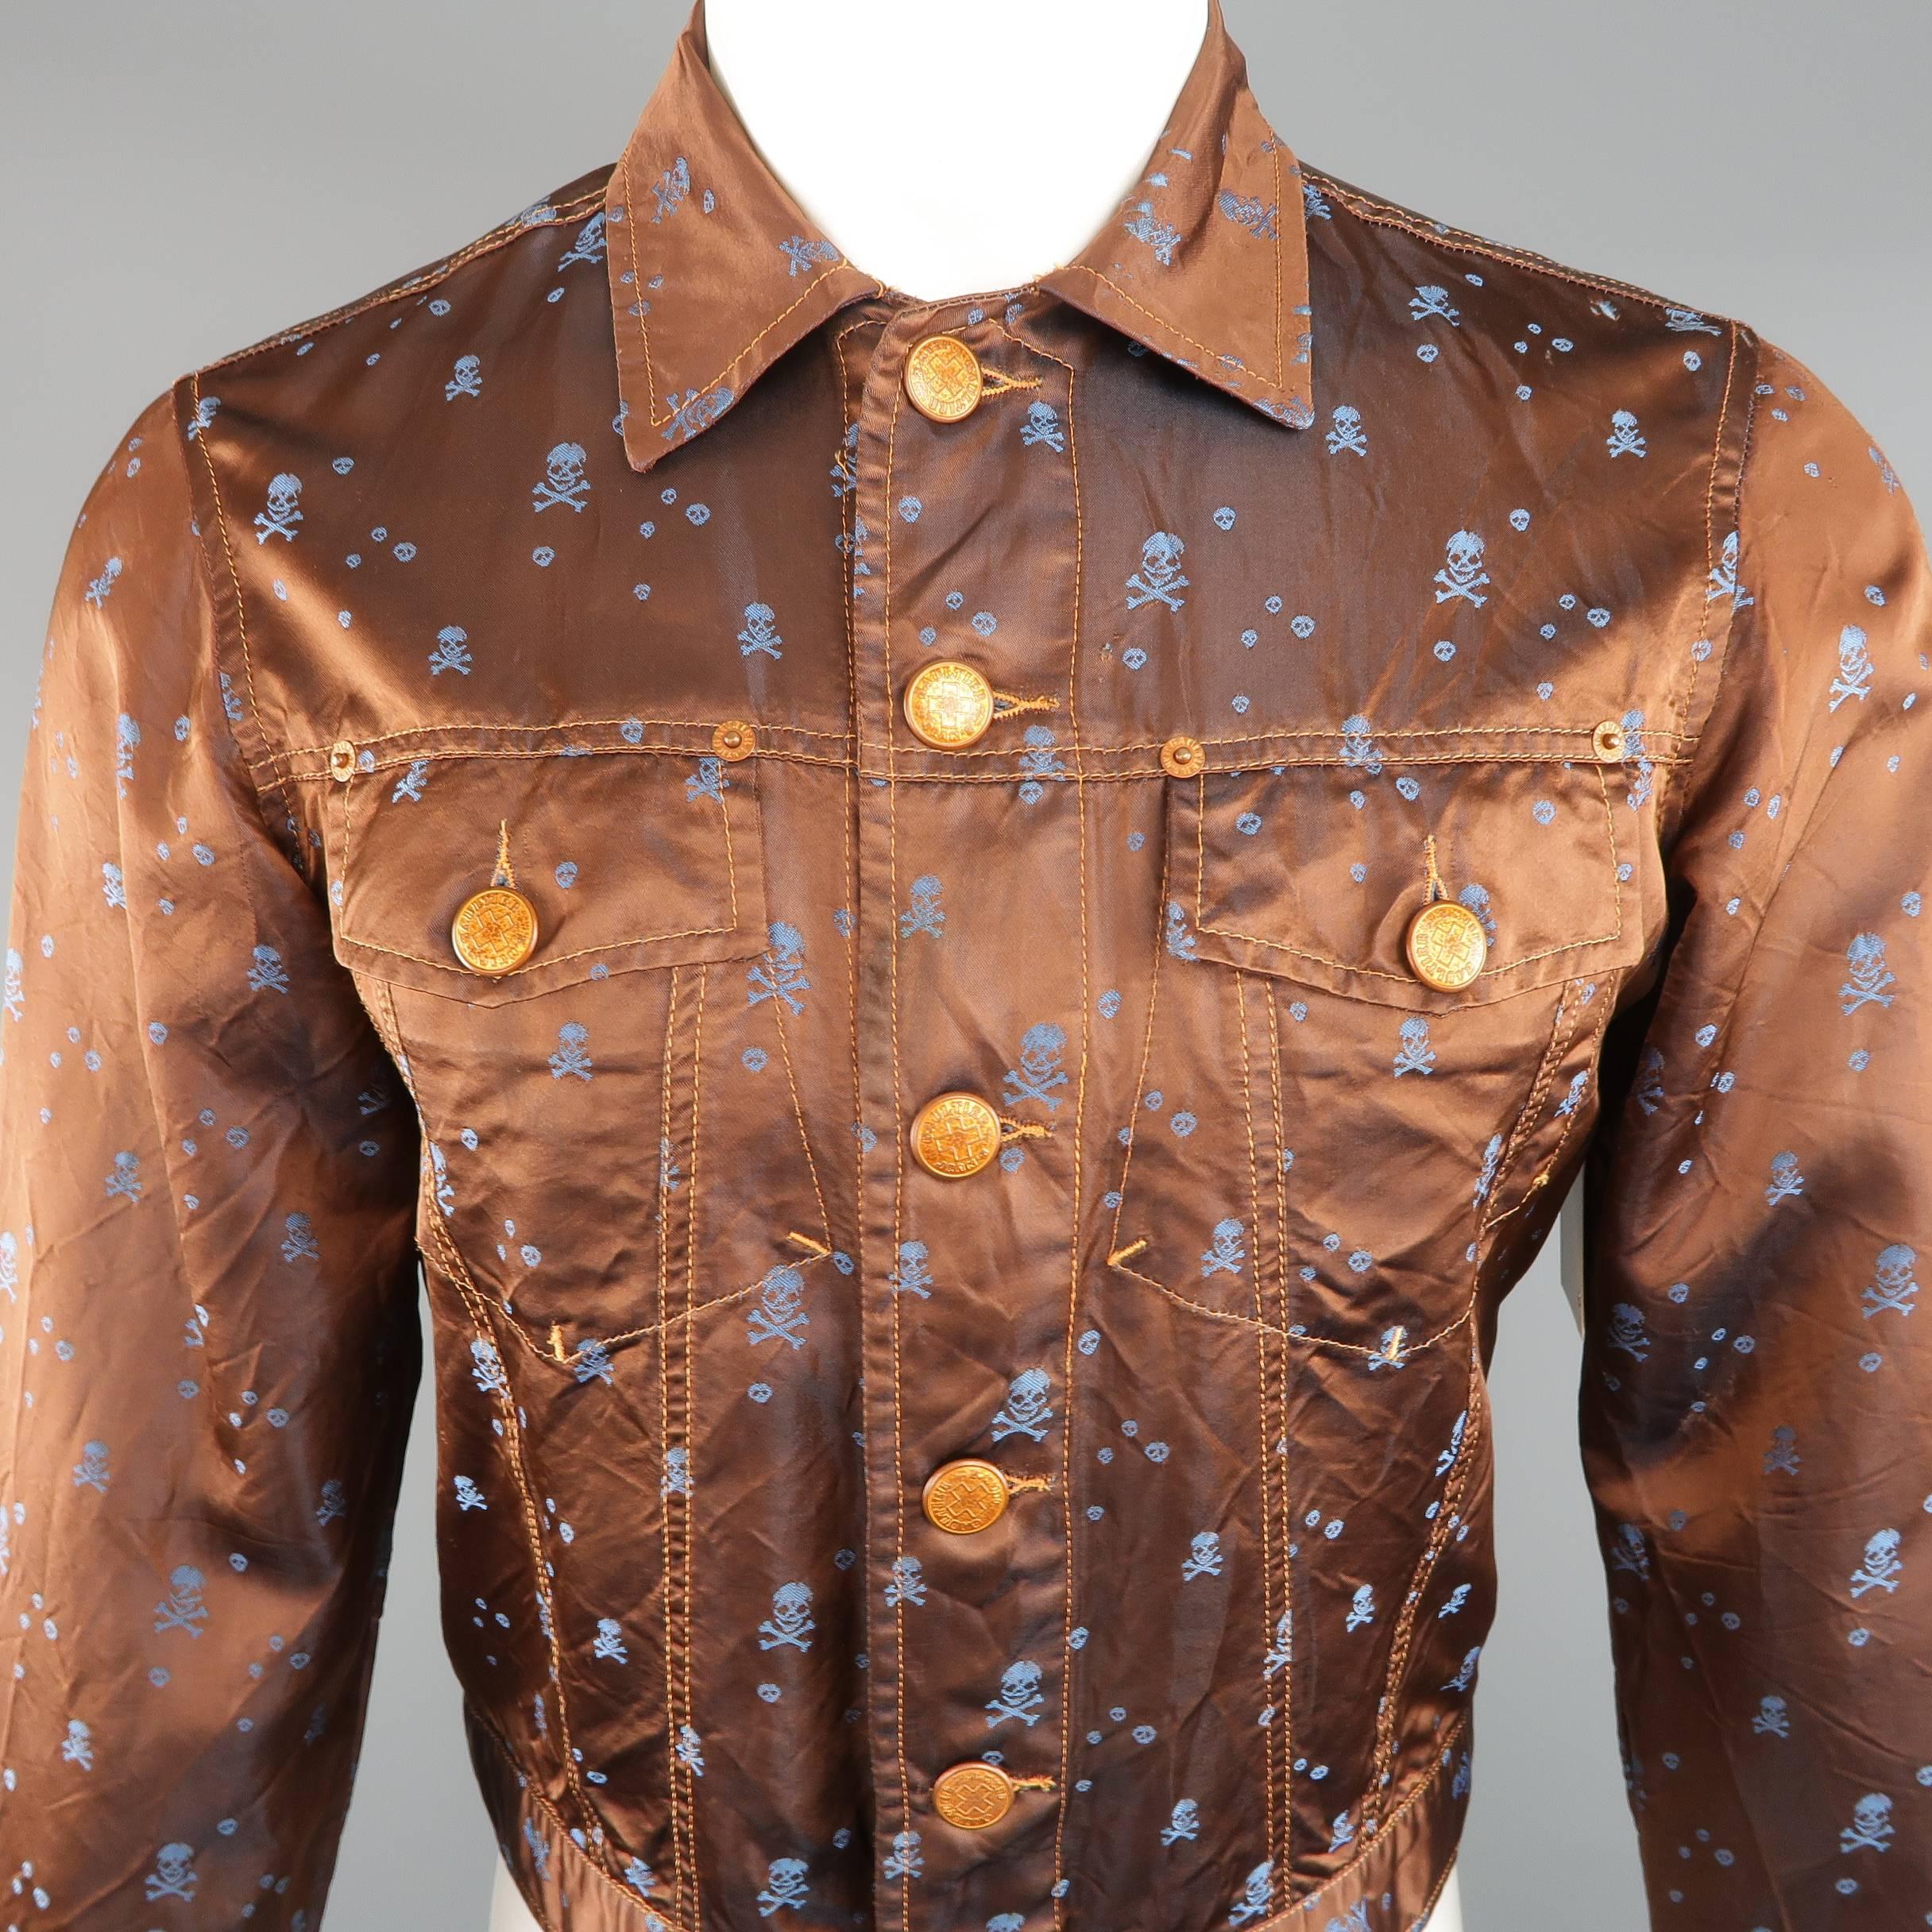 Vintage GAULTIER JEANS by JEAN PAUL GAULTIER trucker jacket comes in a metallic sheen copper wrinkled satin fabric with all over blue skull and crossbones print and features a pointed collar, patch flap chest pockets, cropped hem, oversized copper